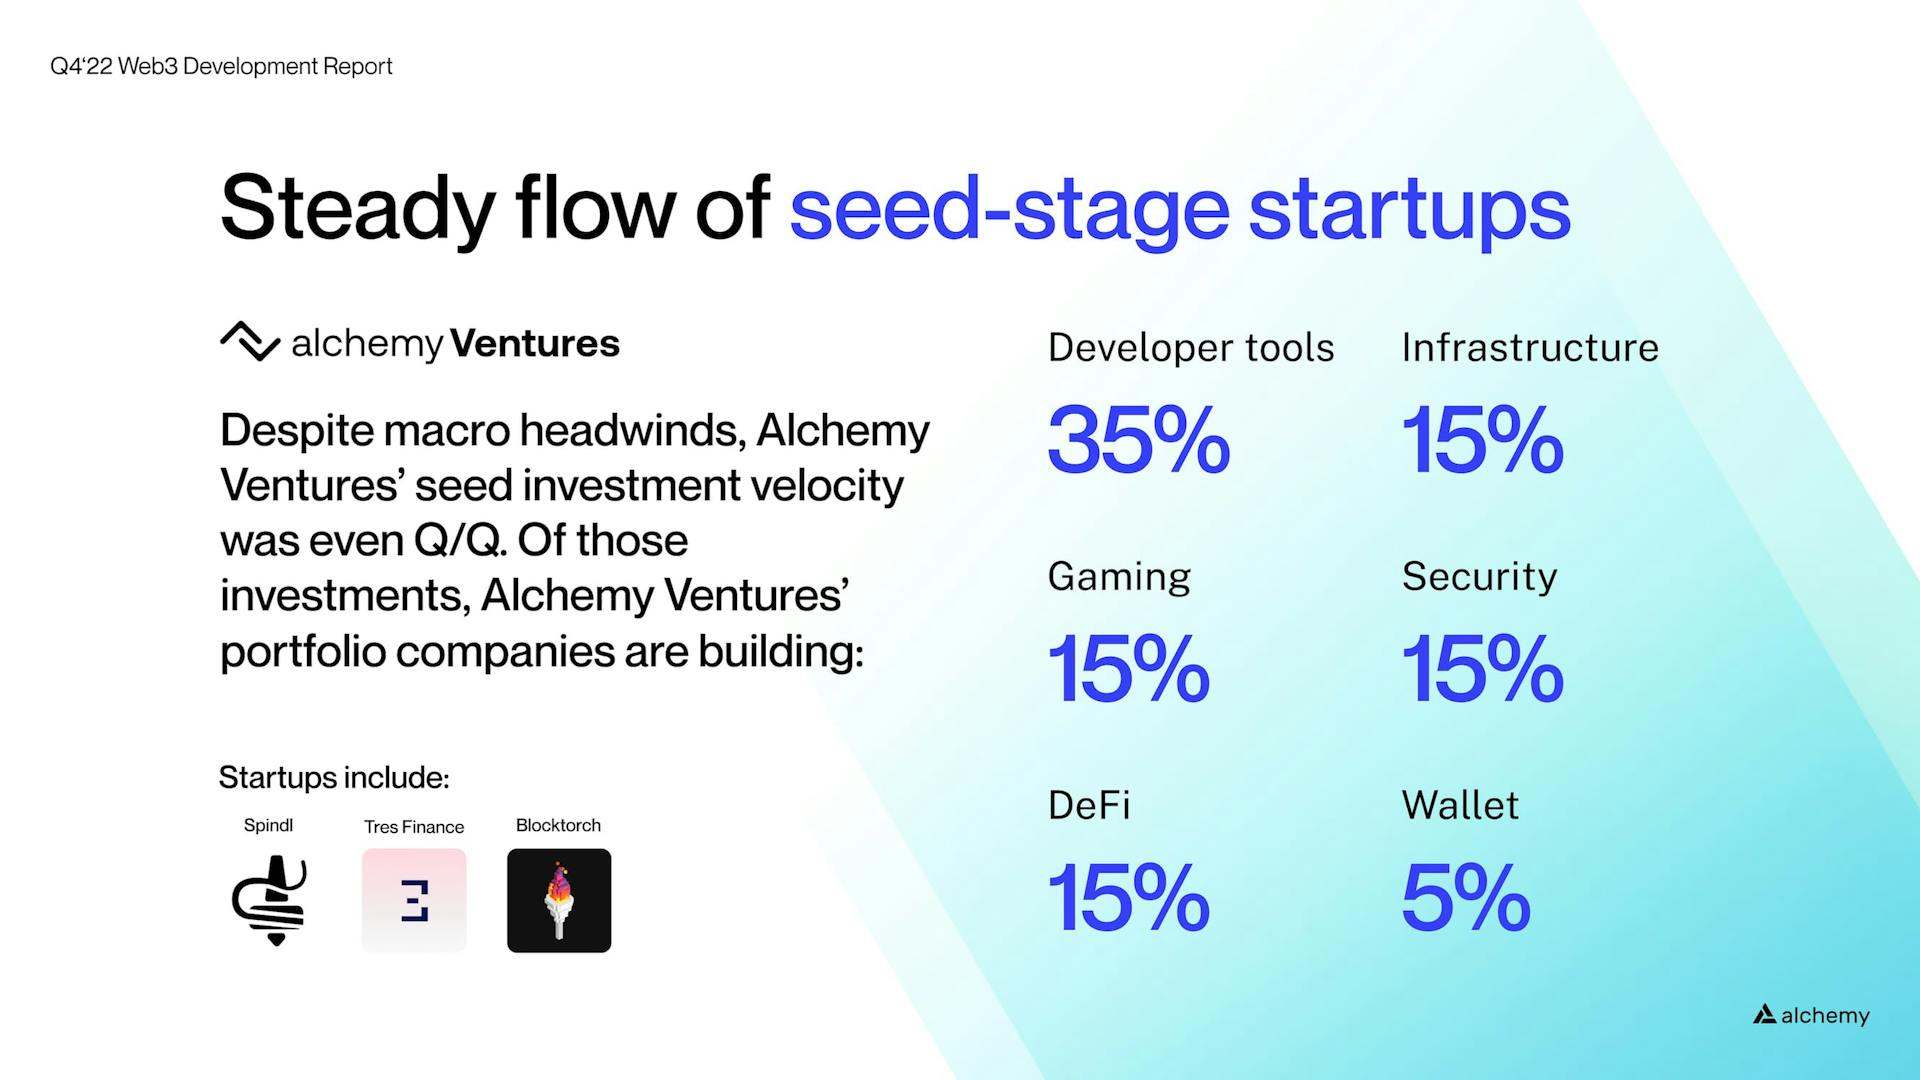 Alchemy Ventures maintains their investment velocity in Q4 2022 compared to Q3.